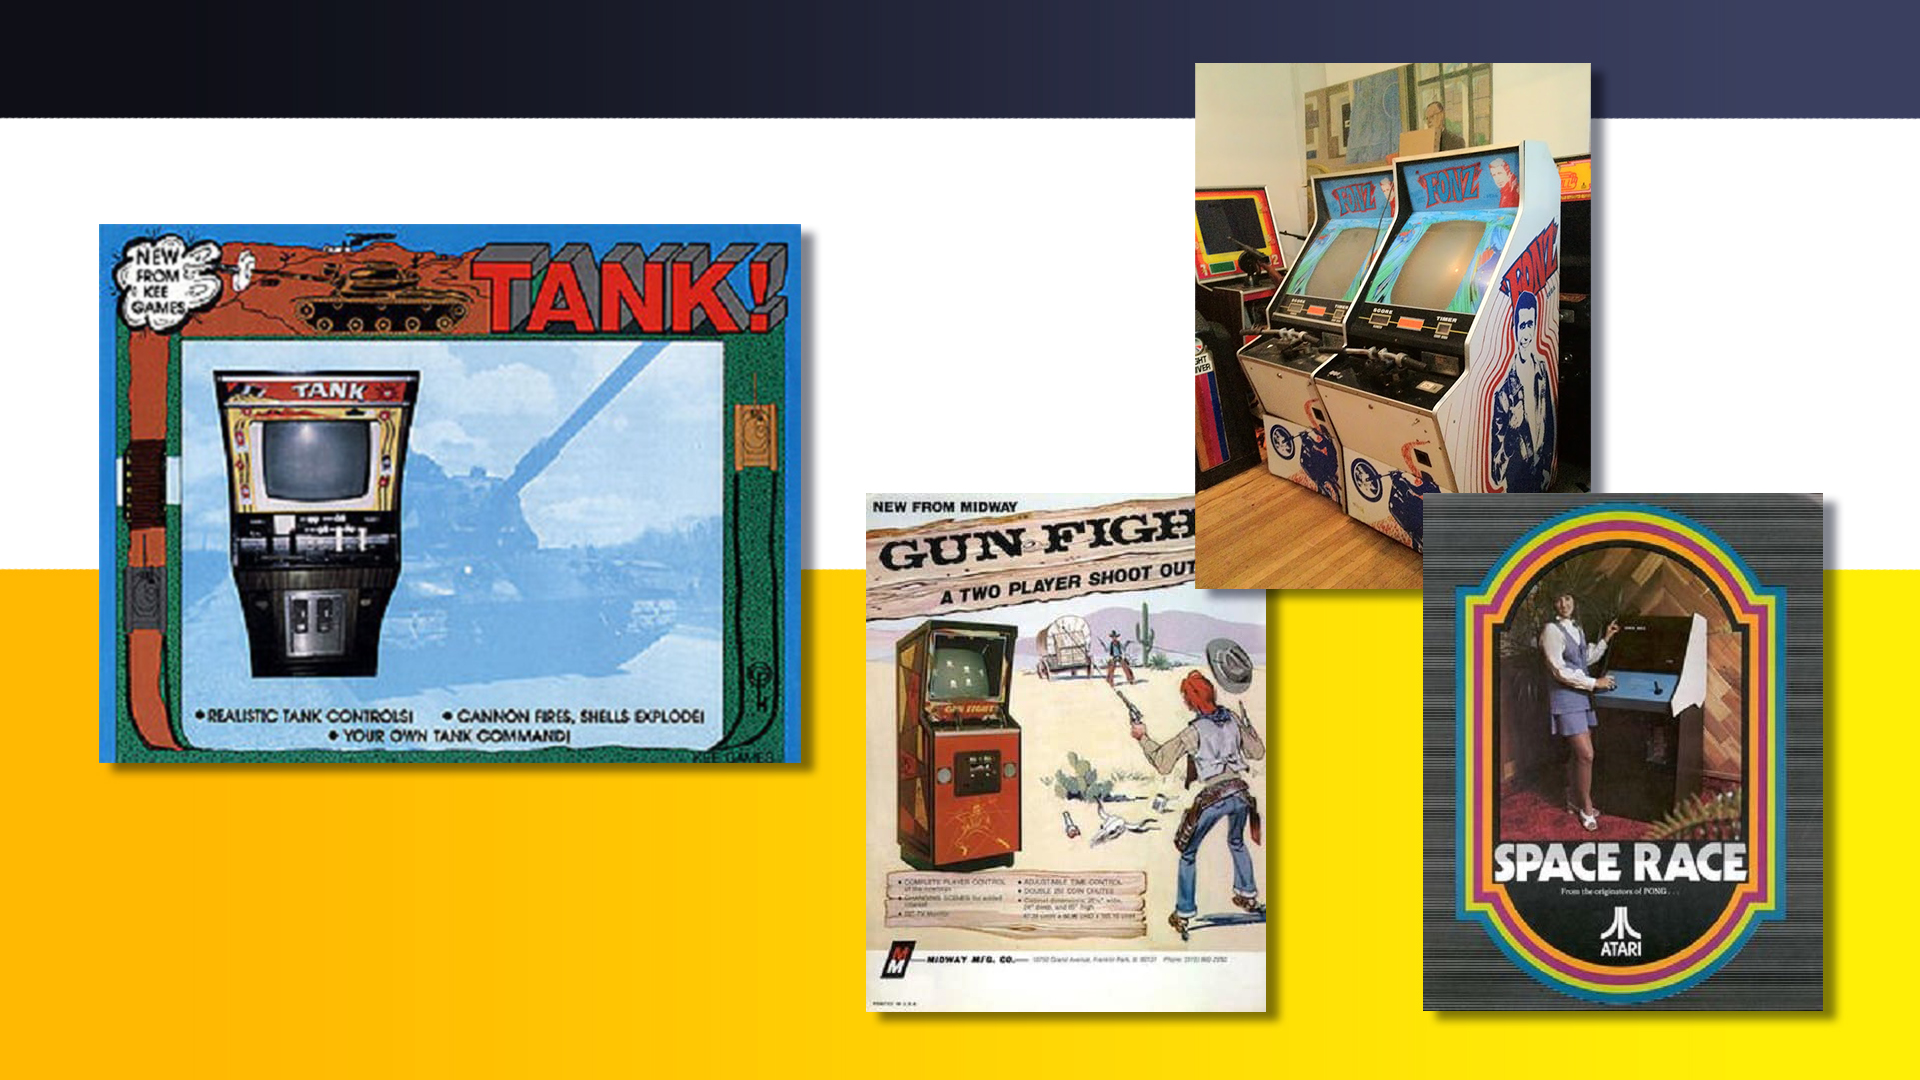 video game box art - space race - Rome Cani Tanki Tank New On Norry Gun Figh Two Player Shoot Out Ubicar Control Cannon Ris, Bells Doloog Your Own Roommande Space Race A